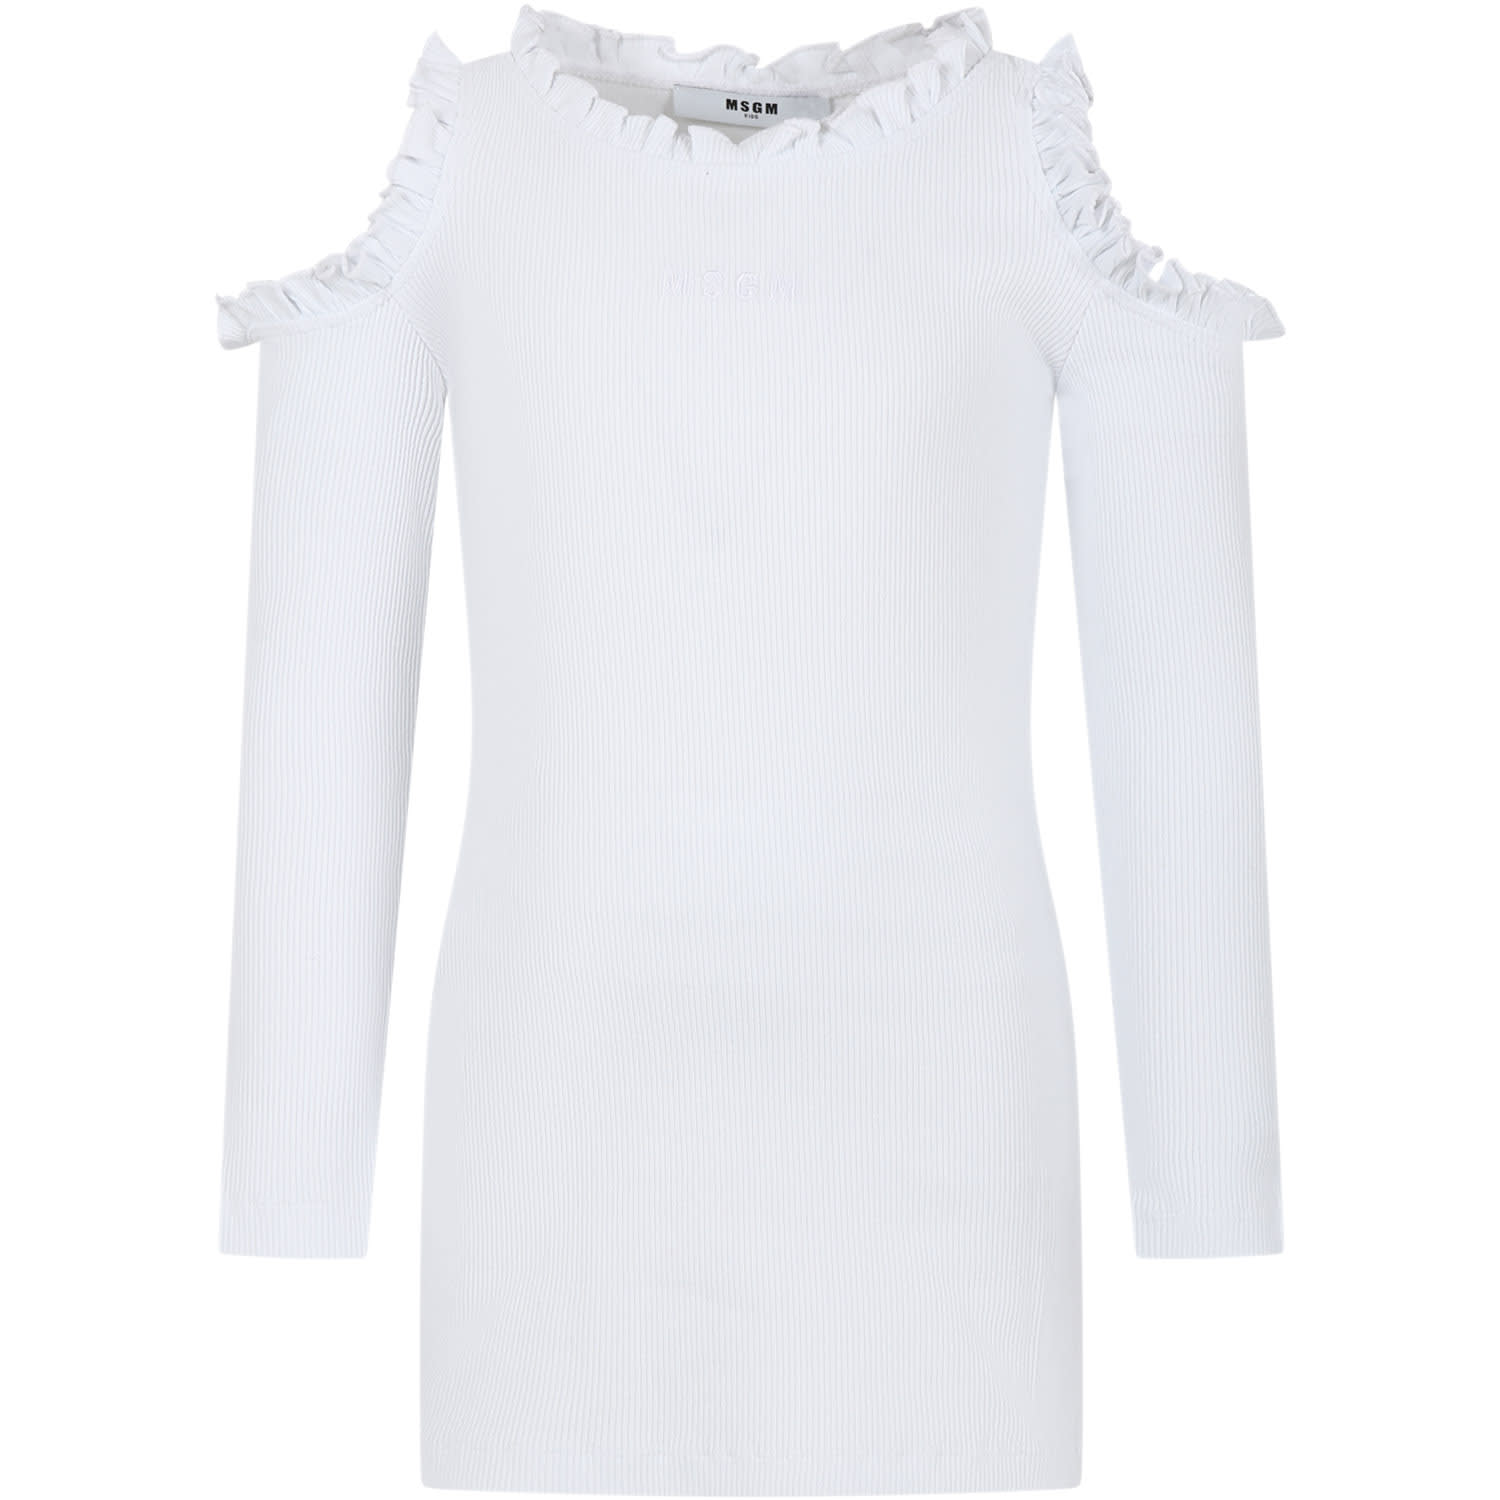 Msgm Kids' White Dress For Girl With Ruffles